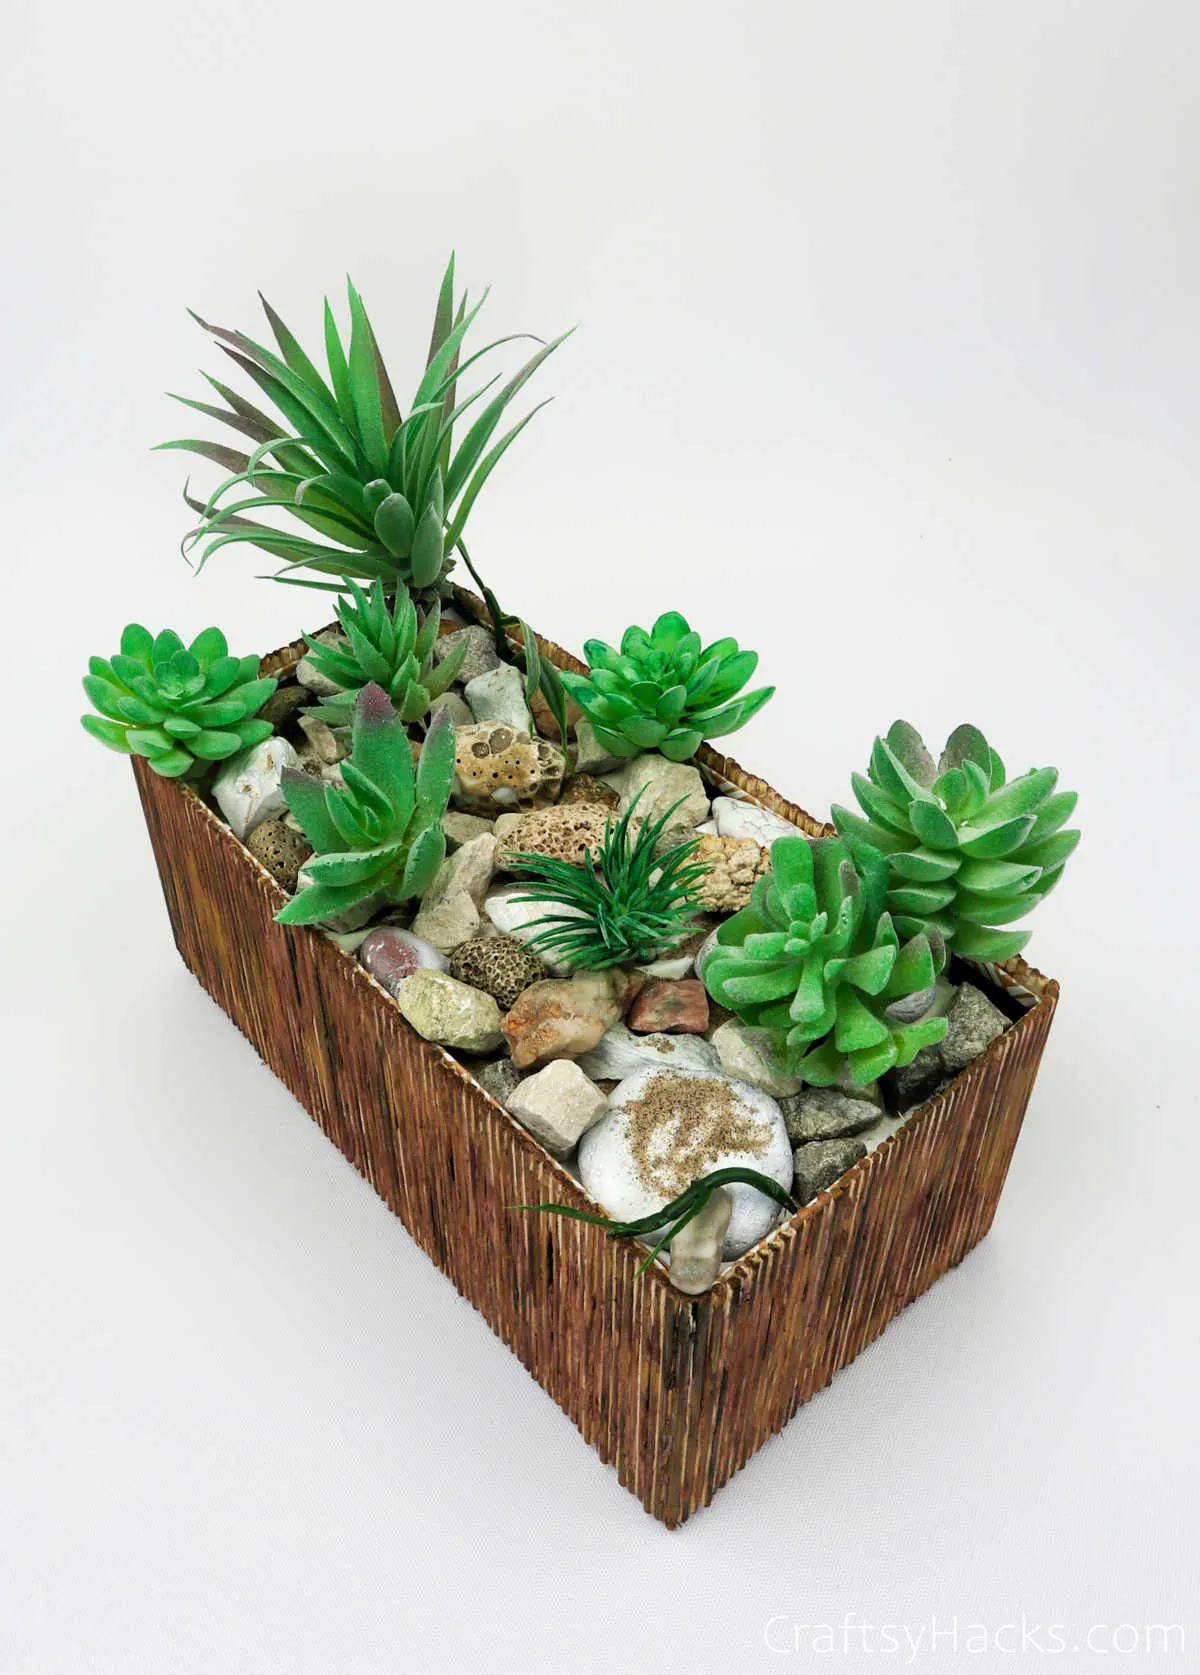 completed planter